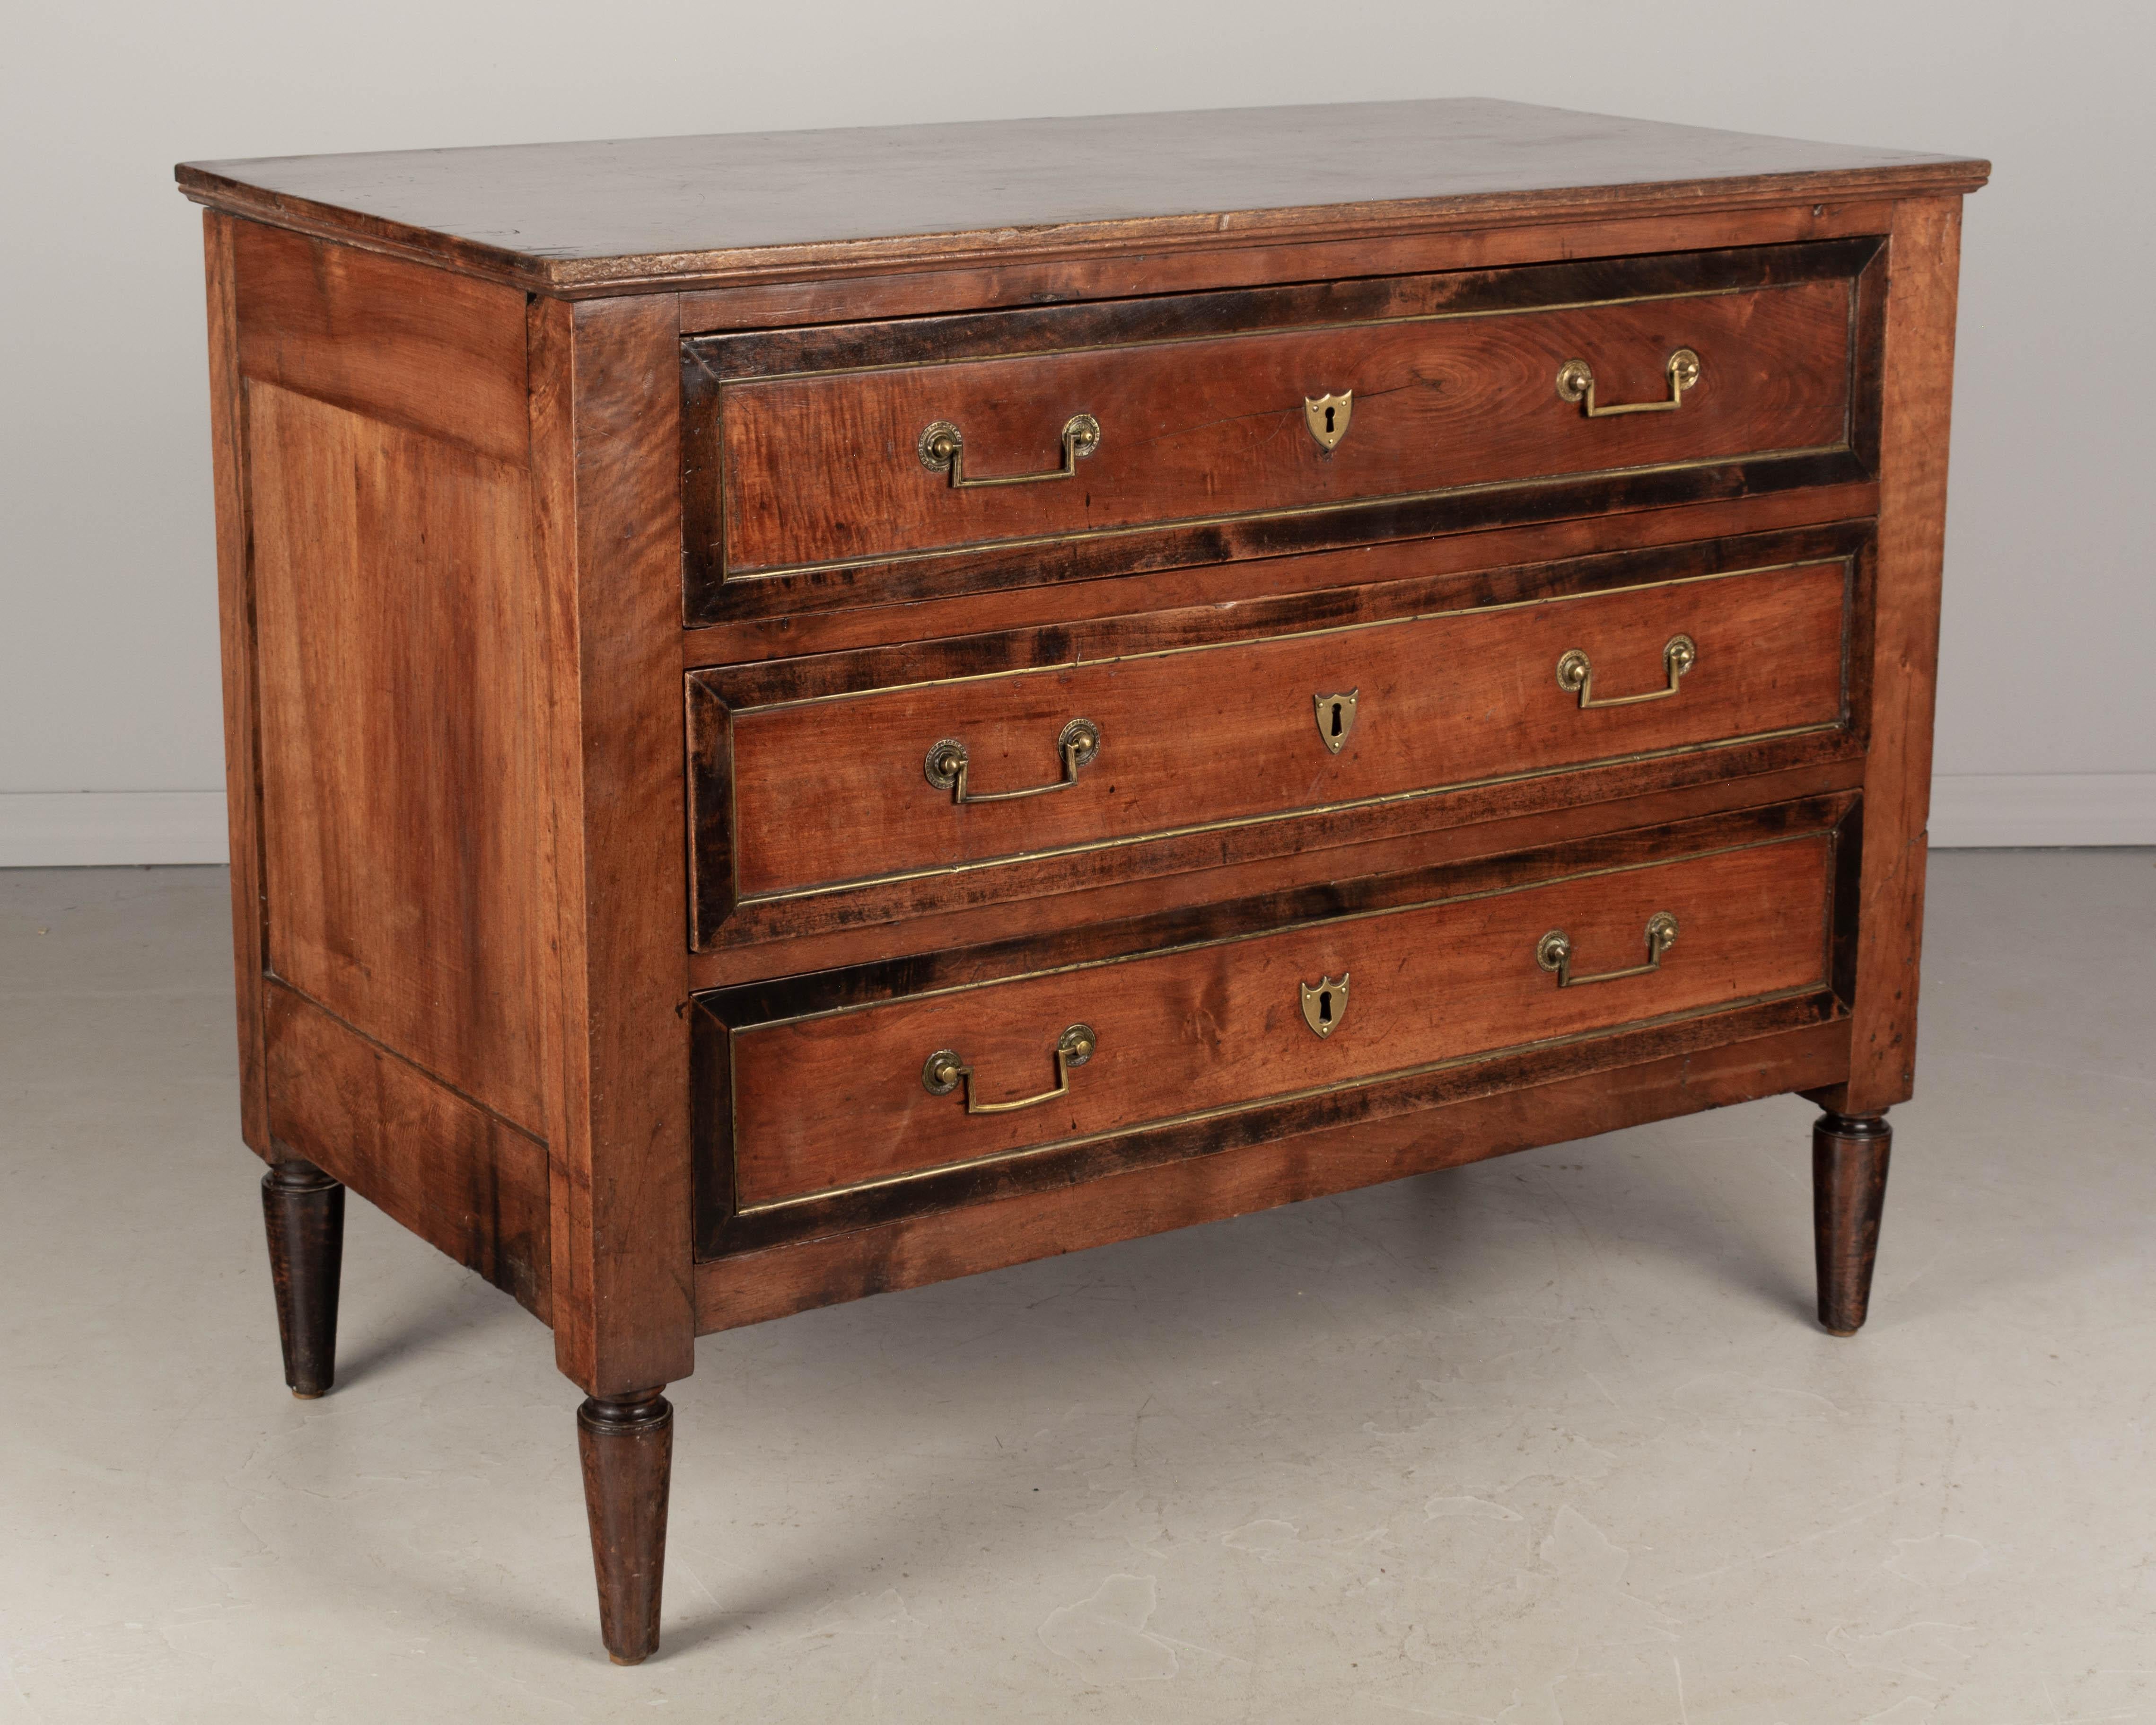 A 19th century Louis XVI style commode, or chest of drawers from the South of France. Made of solid walnut with beautiful patina. Three dovetailed drawers with dark stained outline and brass trim, brass pulls and escutcheons, no locks. Sturdy turned